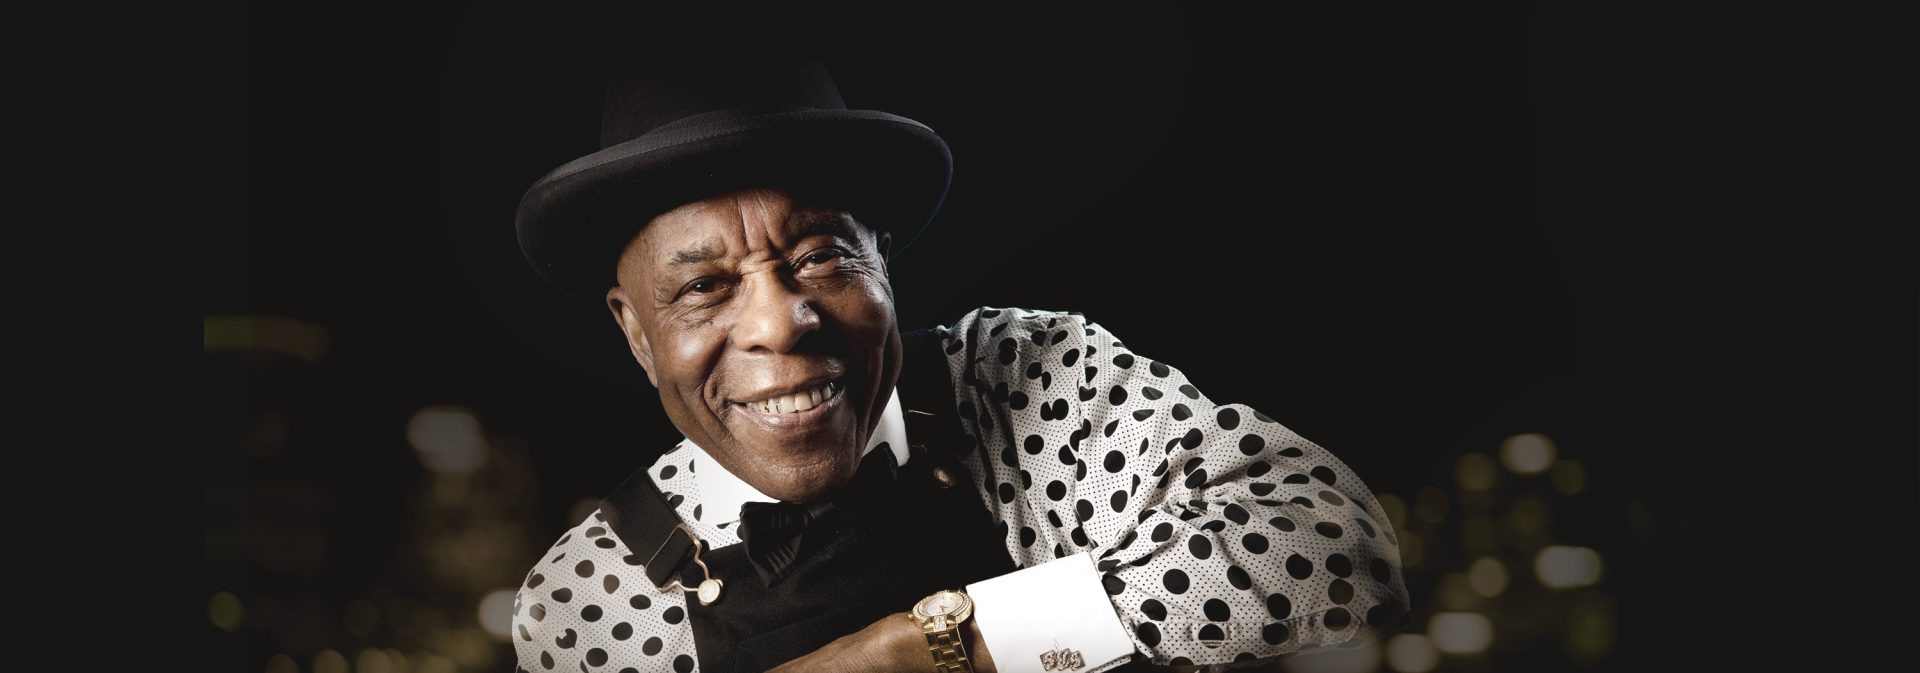 Buddy Guy “Damn Right Farewell” with special guests Eric Gales and King Solomon Hicks